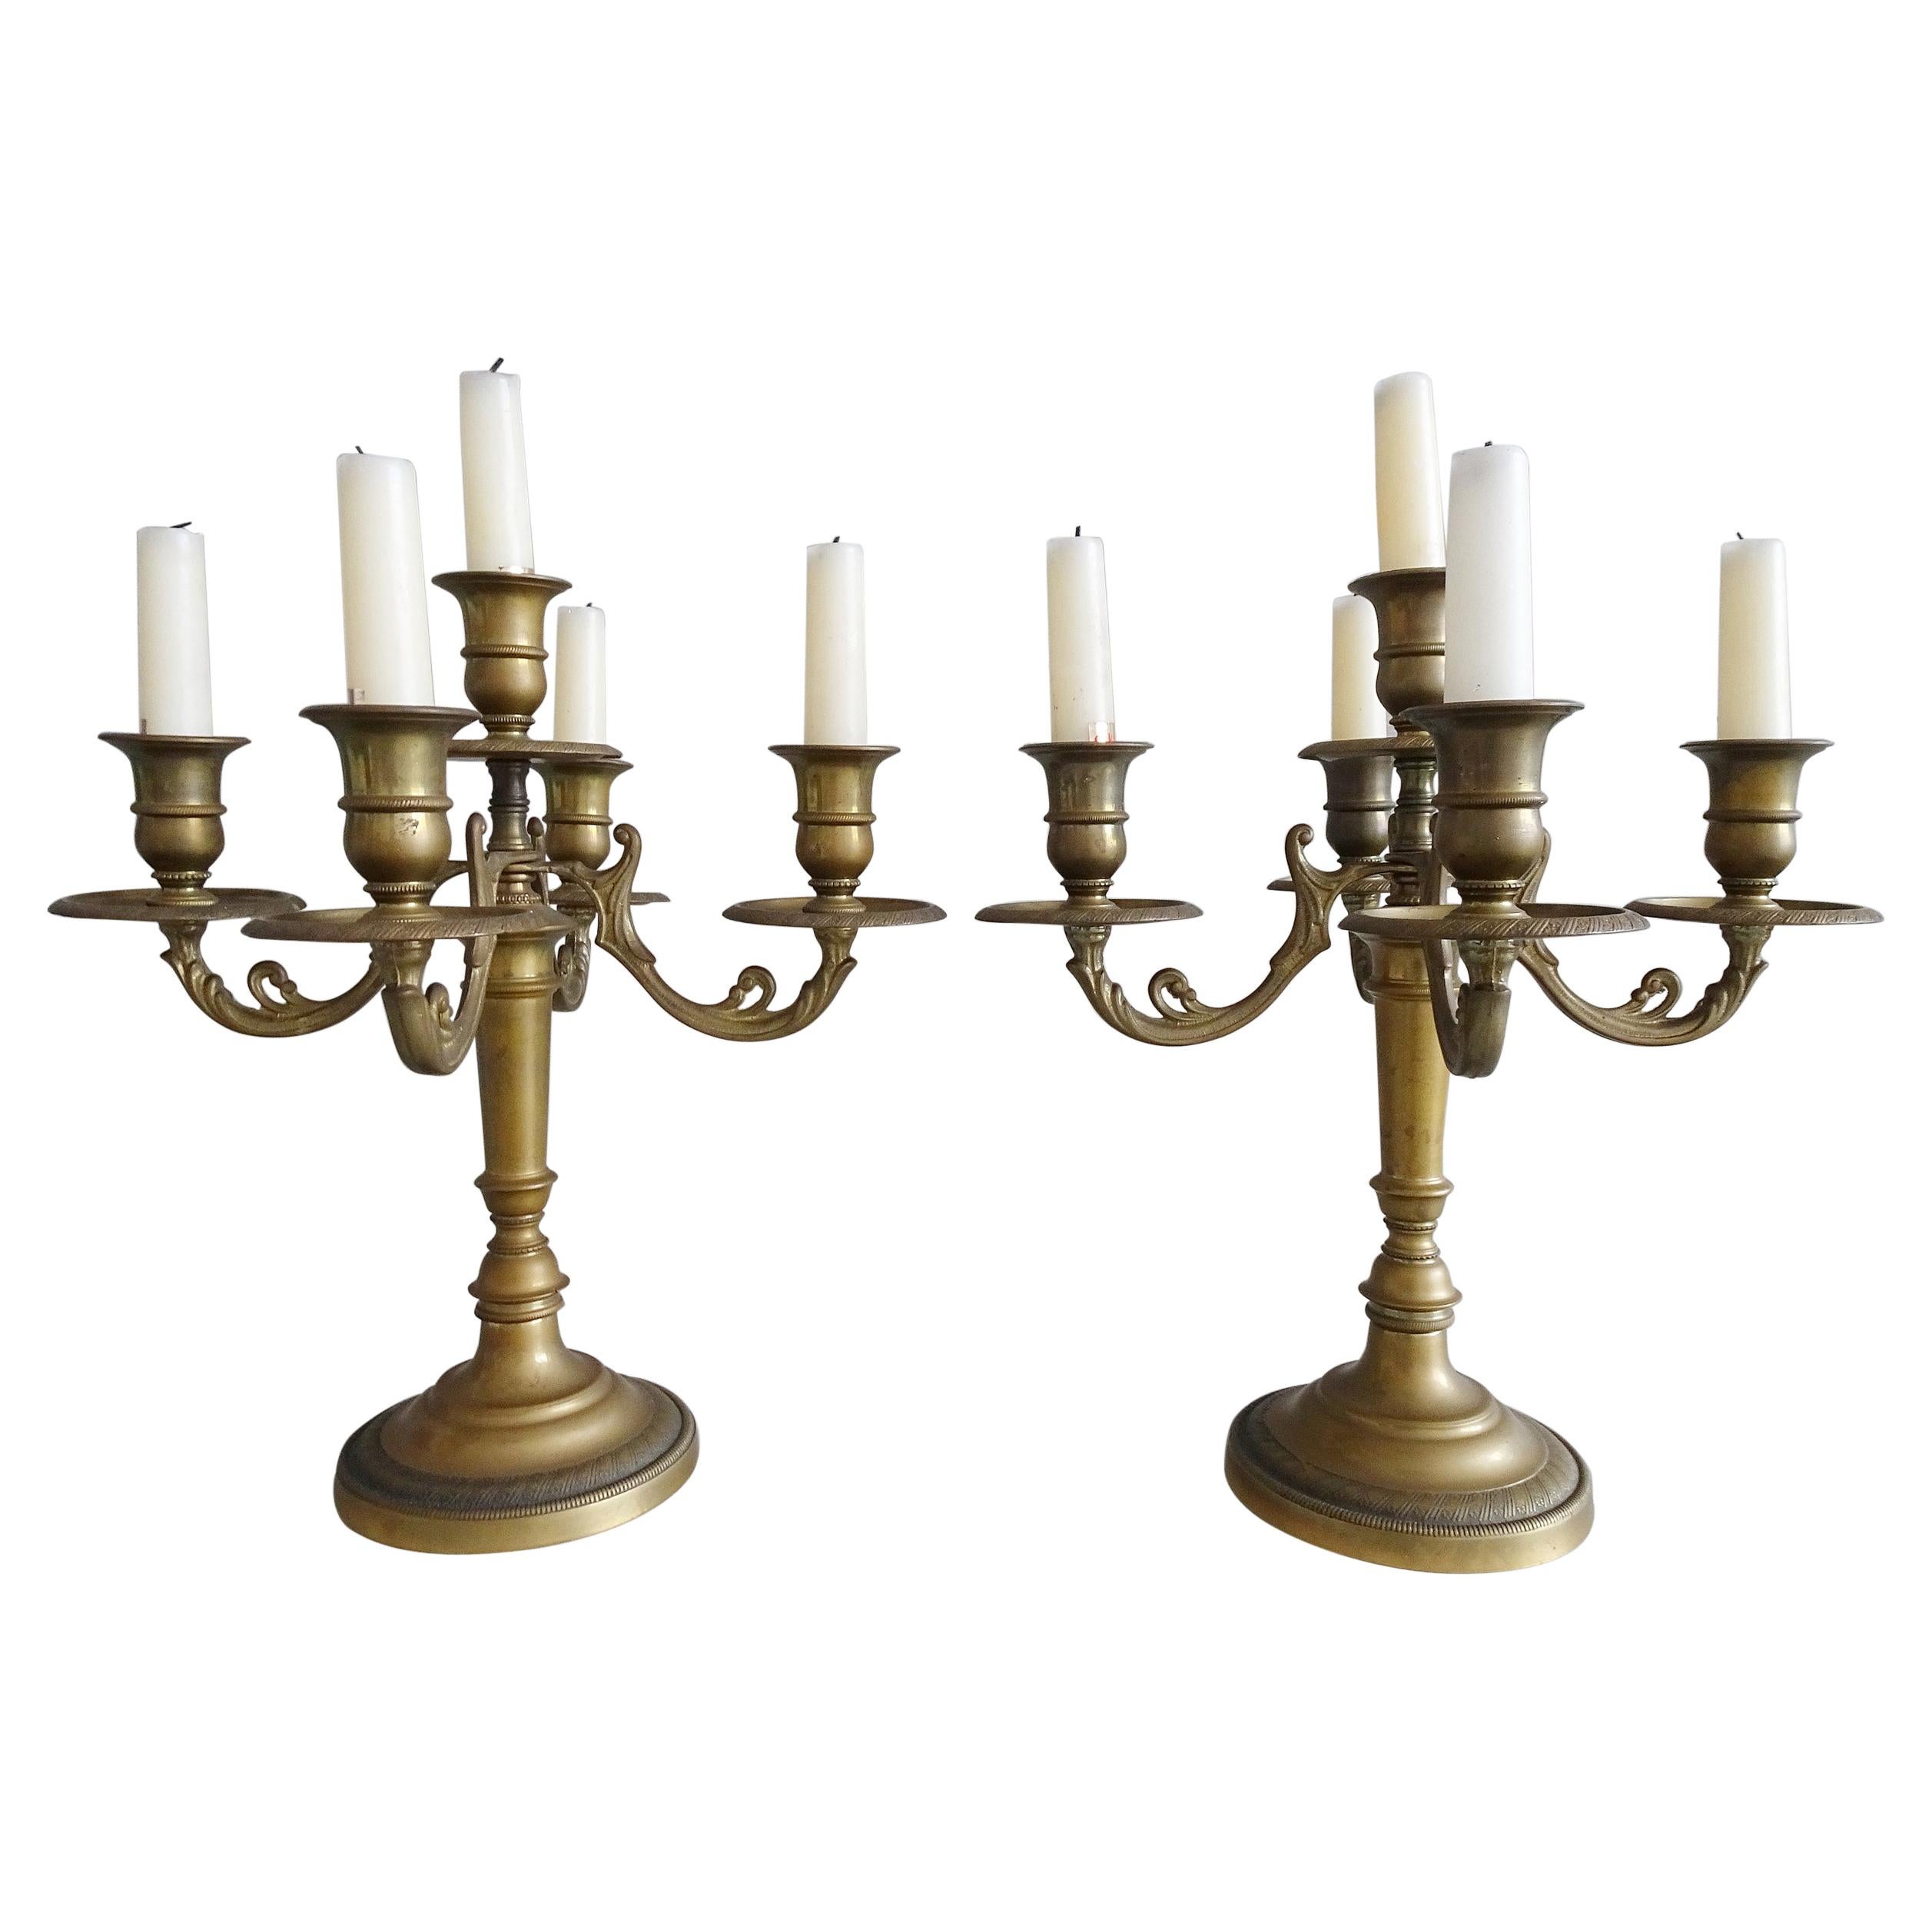 Pair of Early 20th Century French Brass Candelabra, France, 1900s